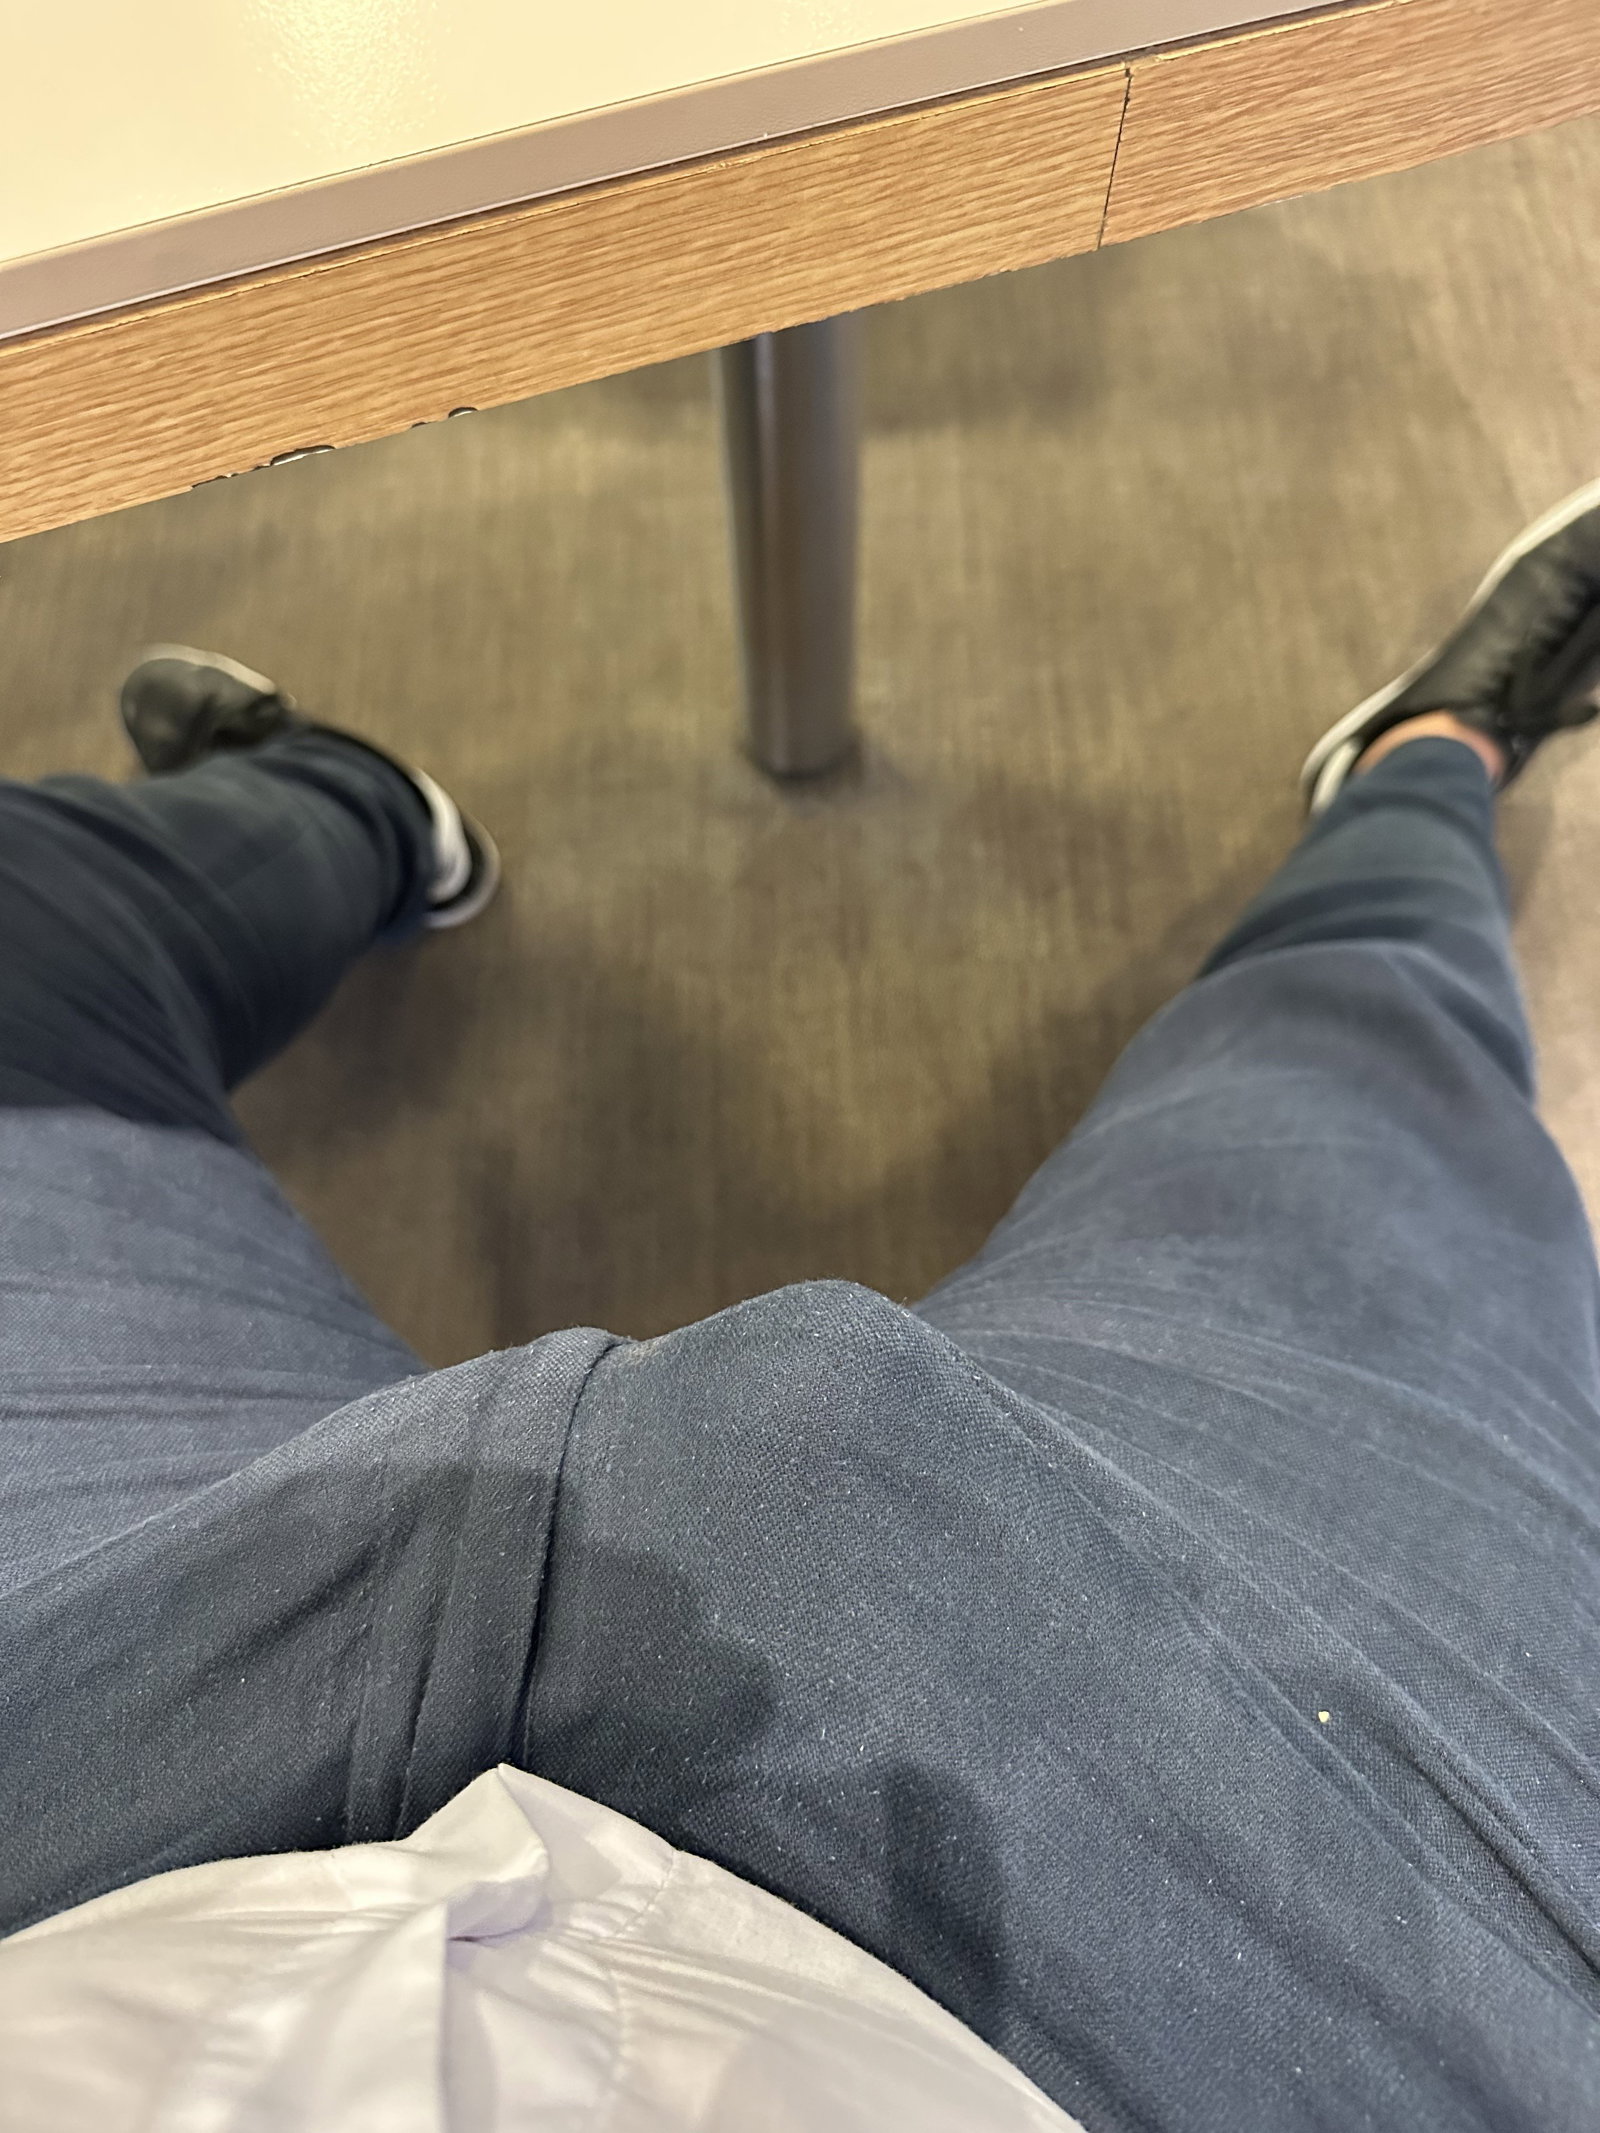 Watch the Photo by Gifted18 with the username @Gifted18, posted on October 28, 2022. The post is about the topic GIfted18's dick. and the text says 'Normal day at work!'